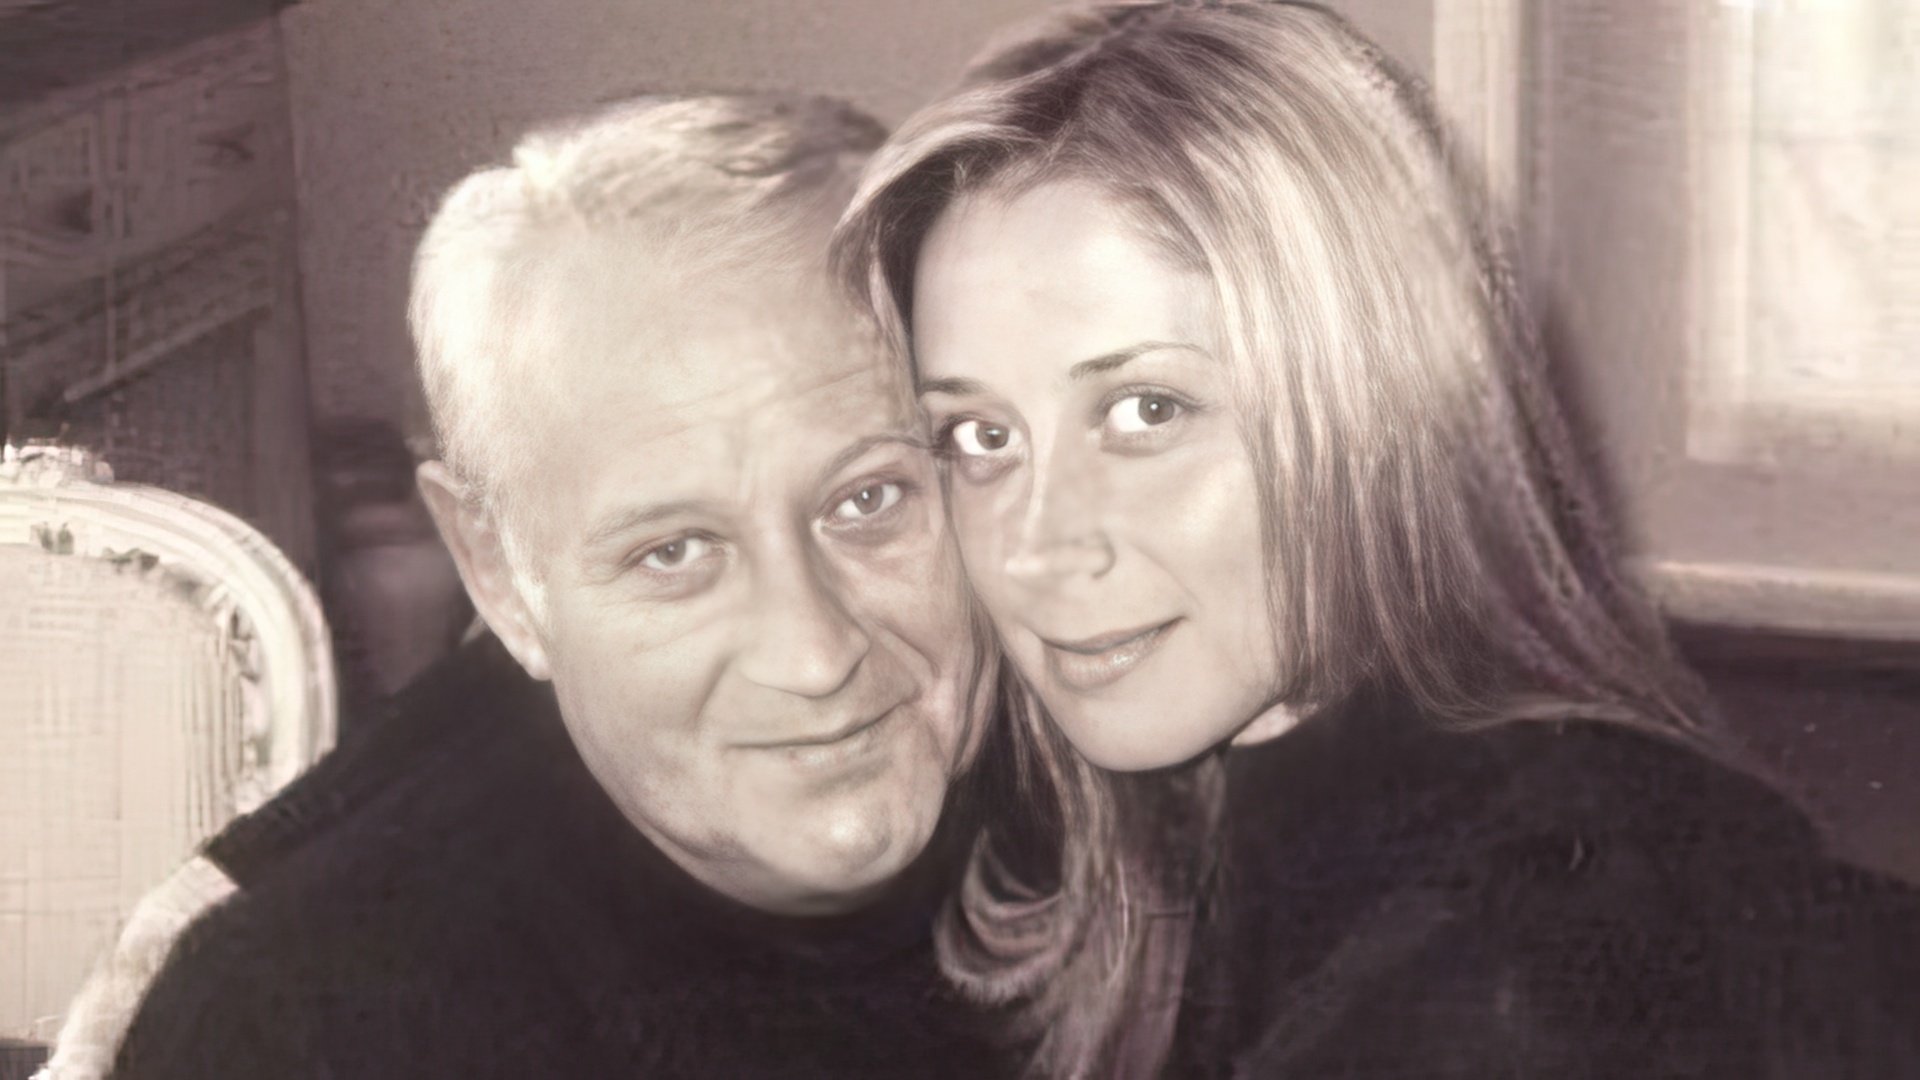 Lara Fabian's career was advanced by her father